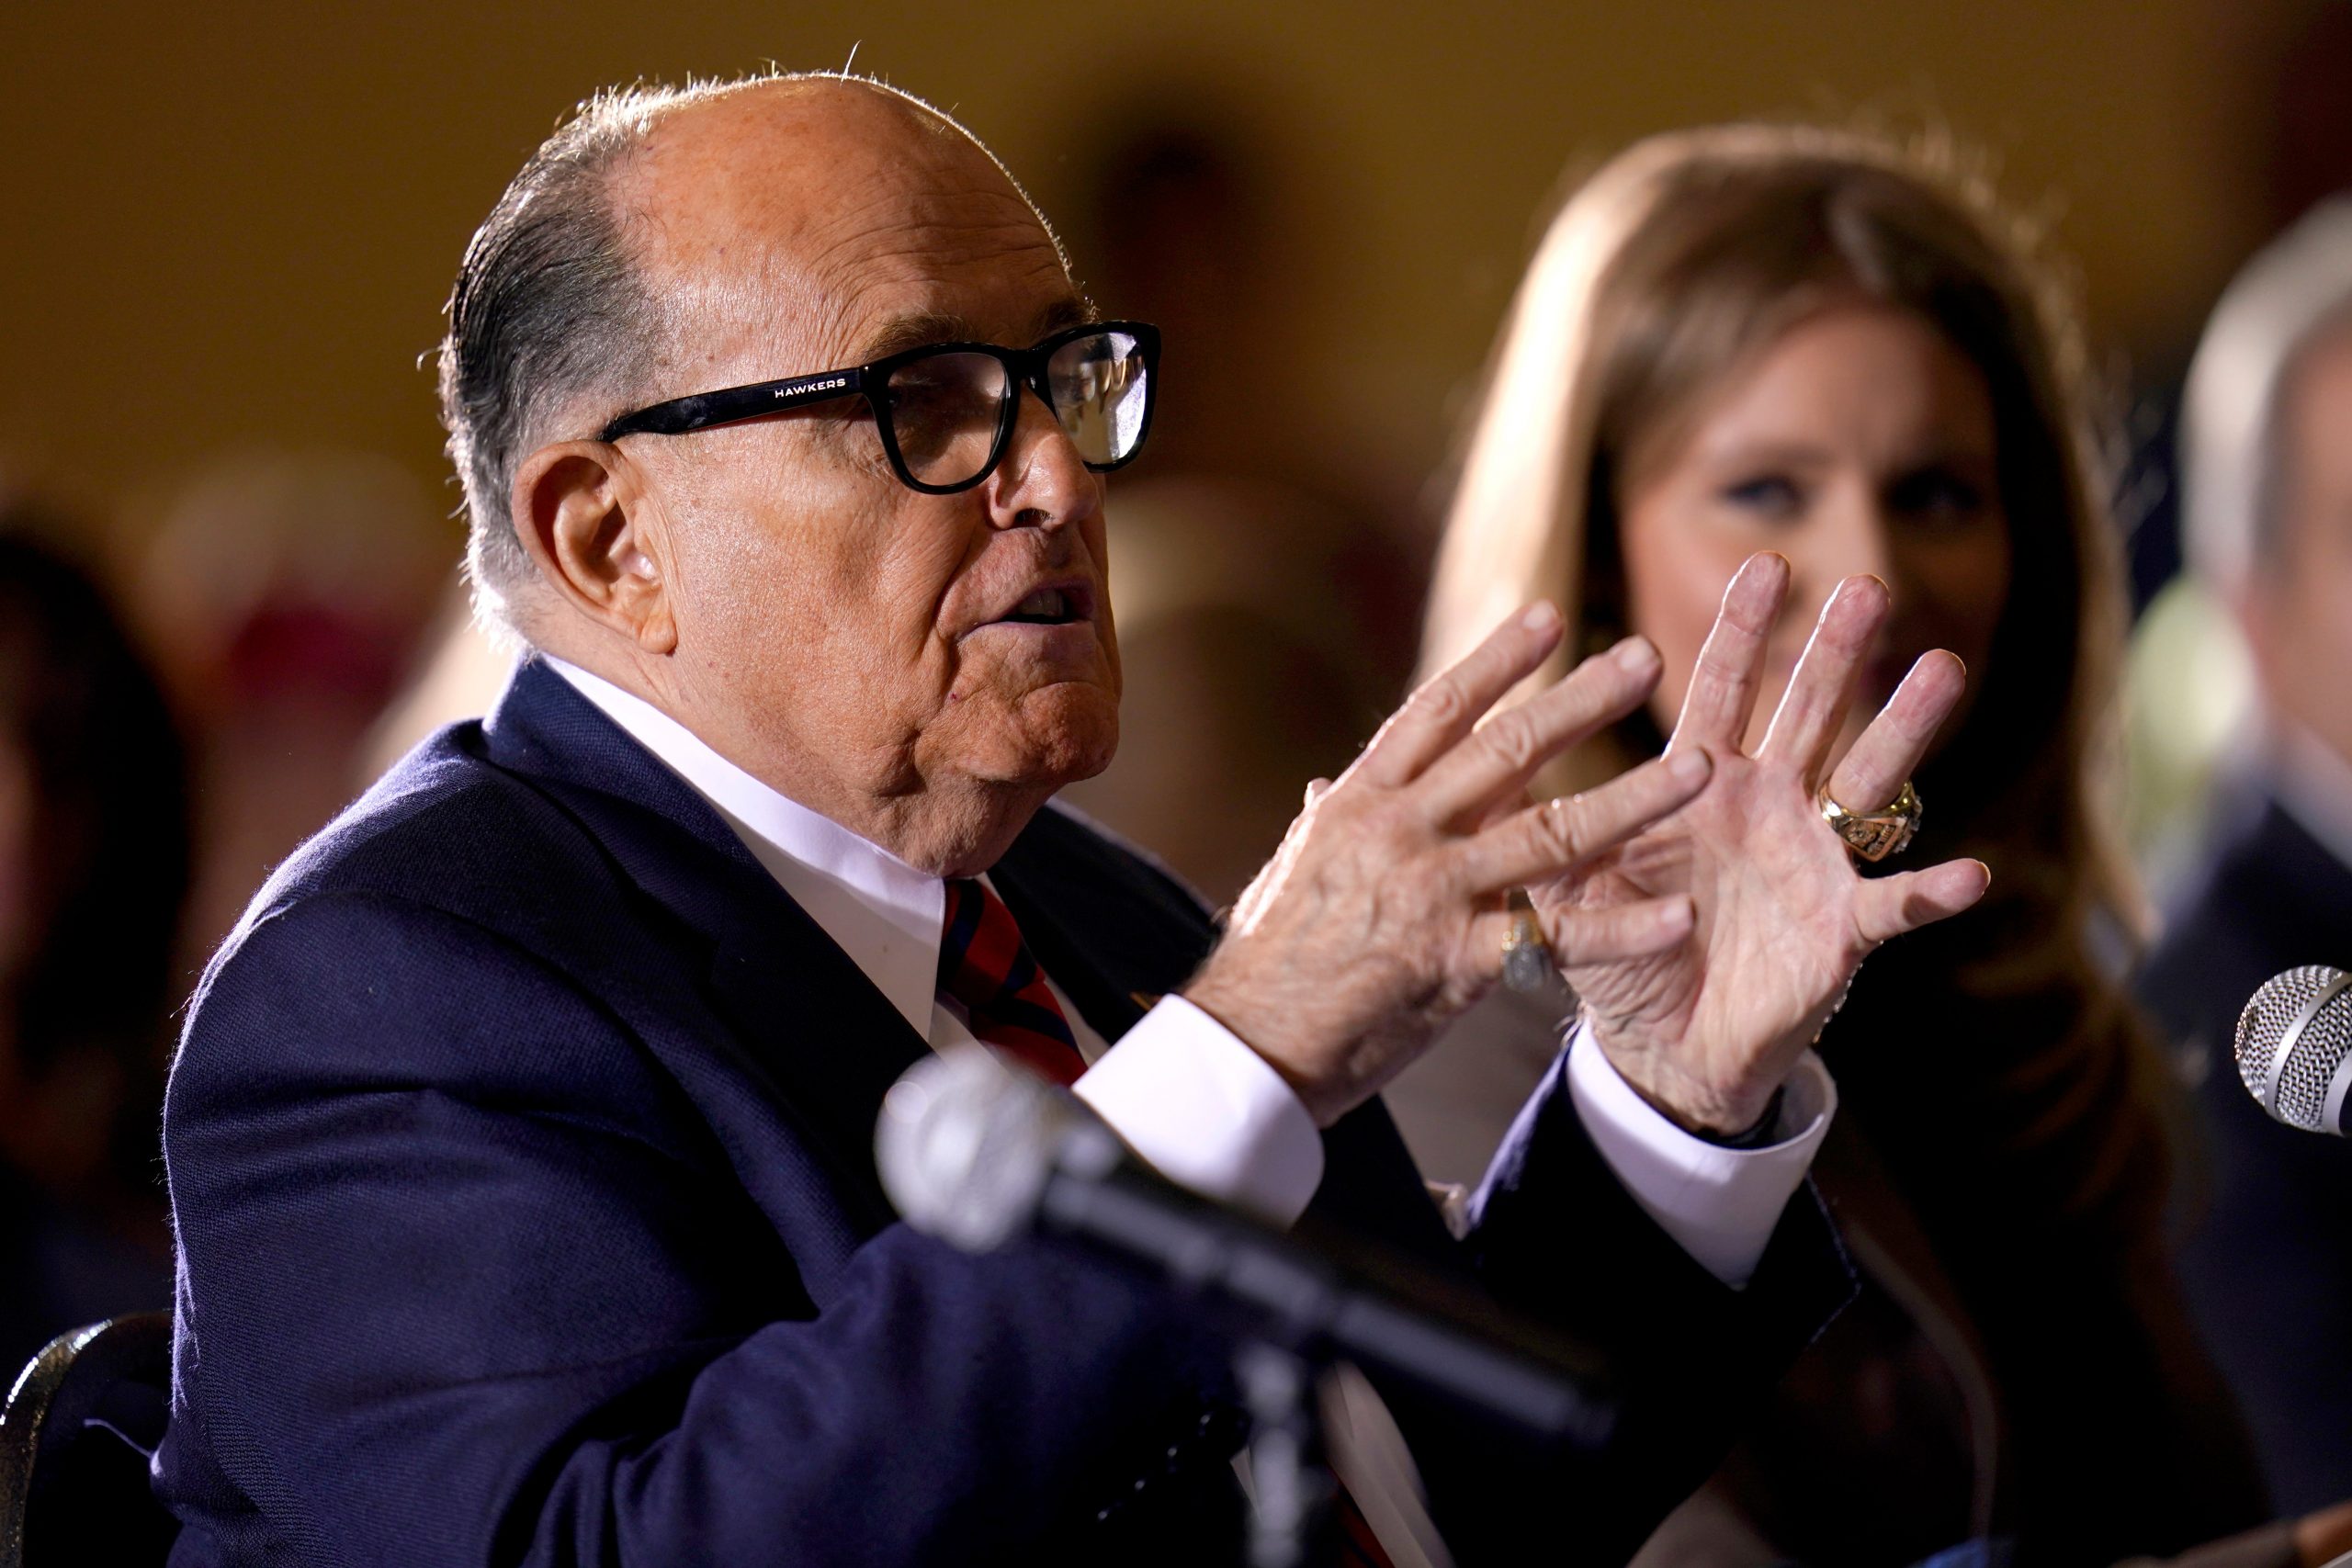 "Your election is fake": Giuliani tells Pennsylvania "I know scammers very well" as he appears in Gettysburg

